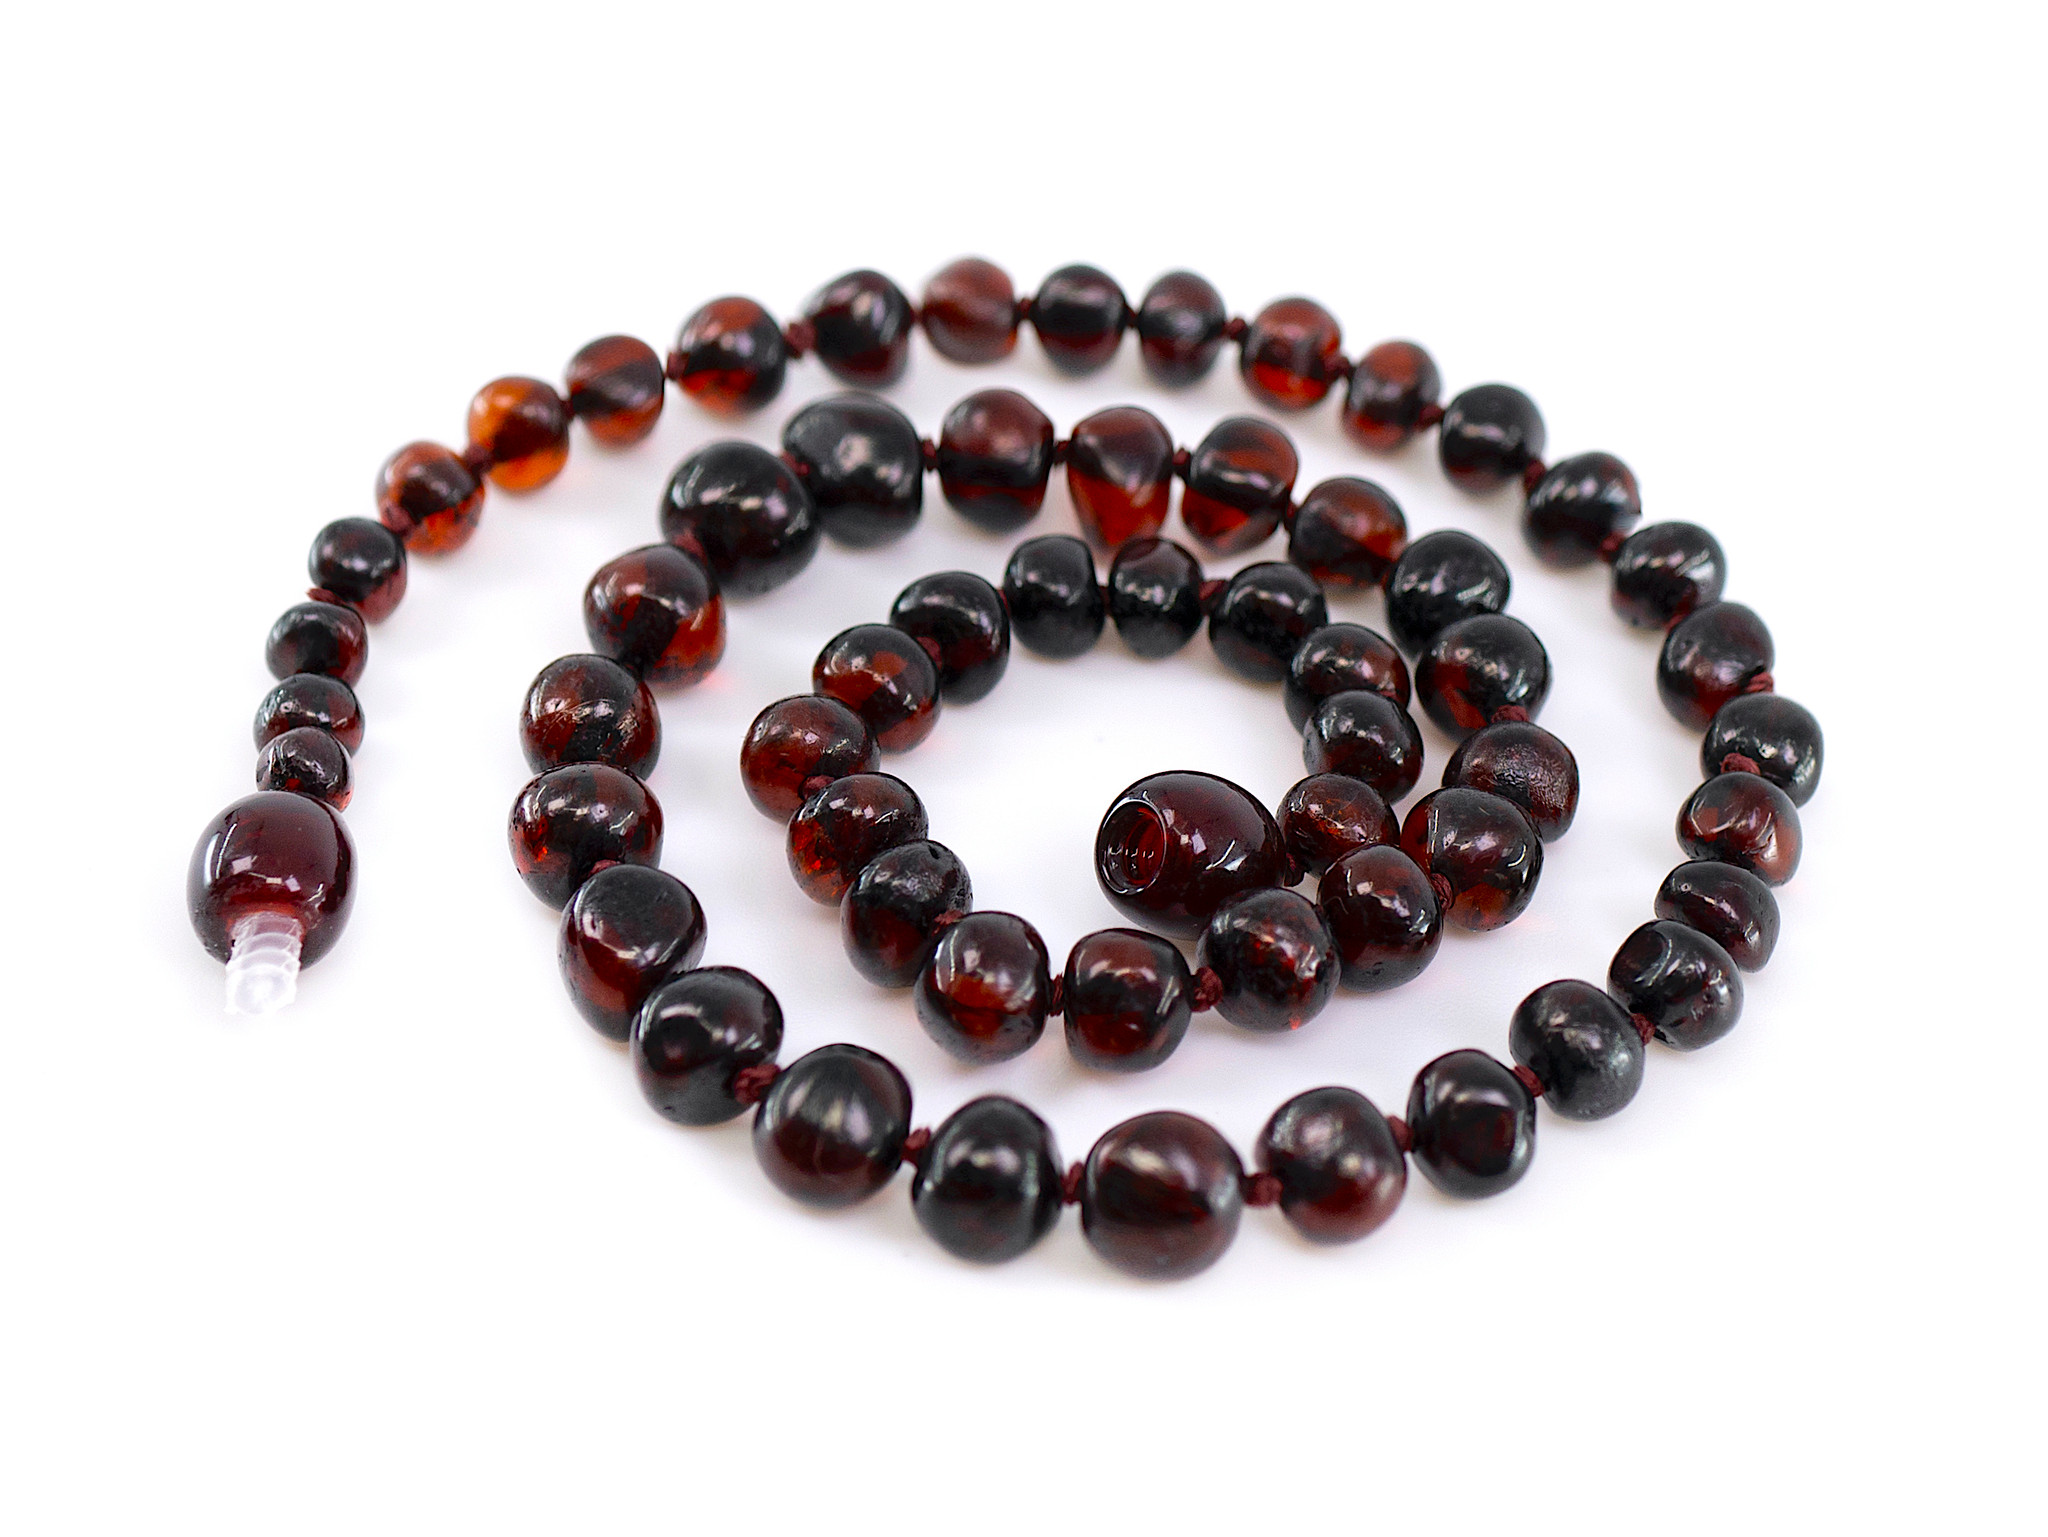 Cherry Baltic Amber Necklaces Made of Large Oval Amber Beads.